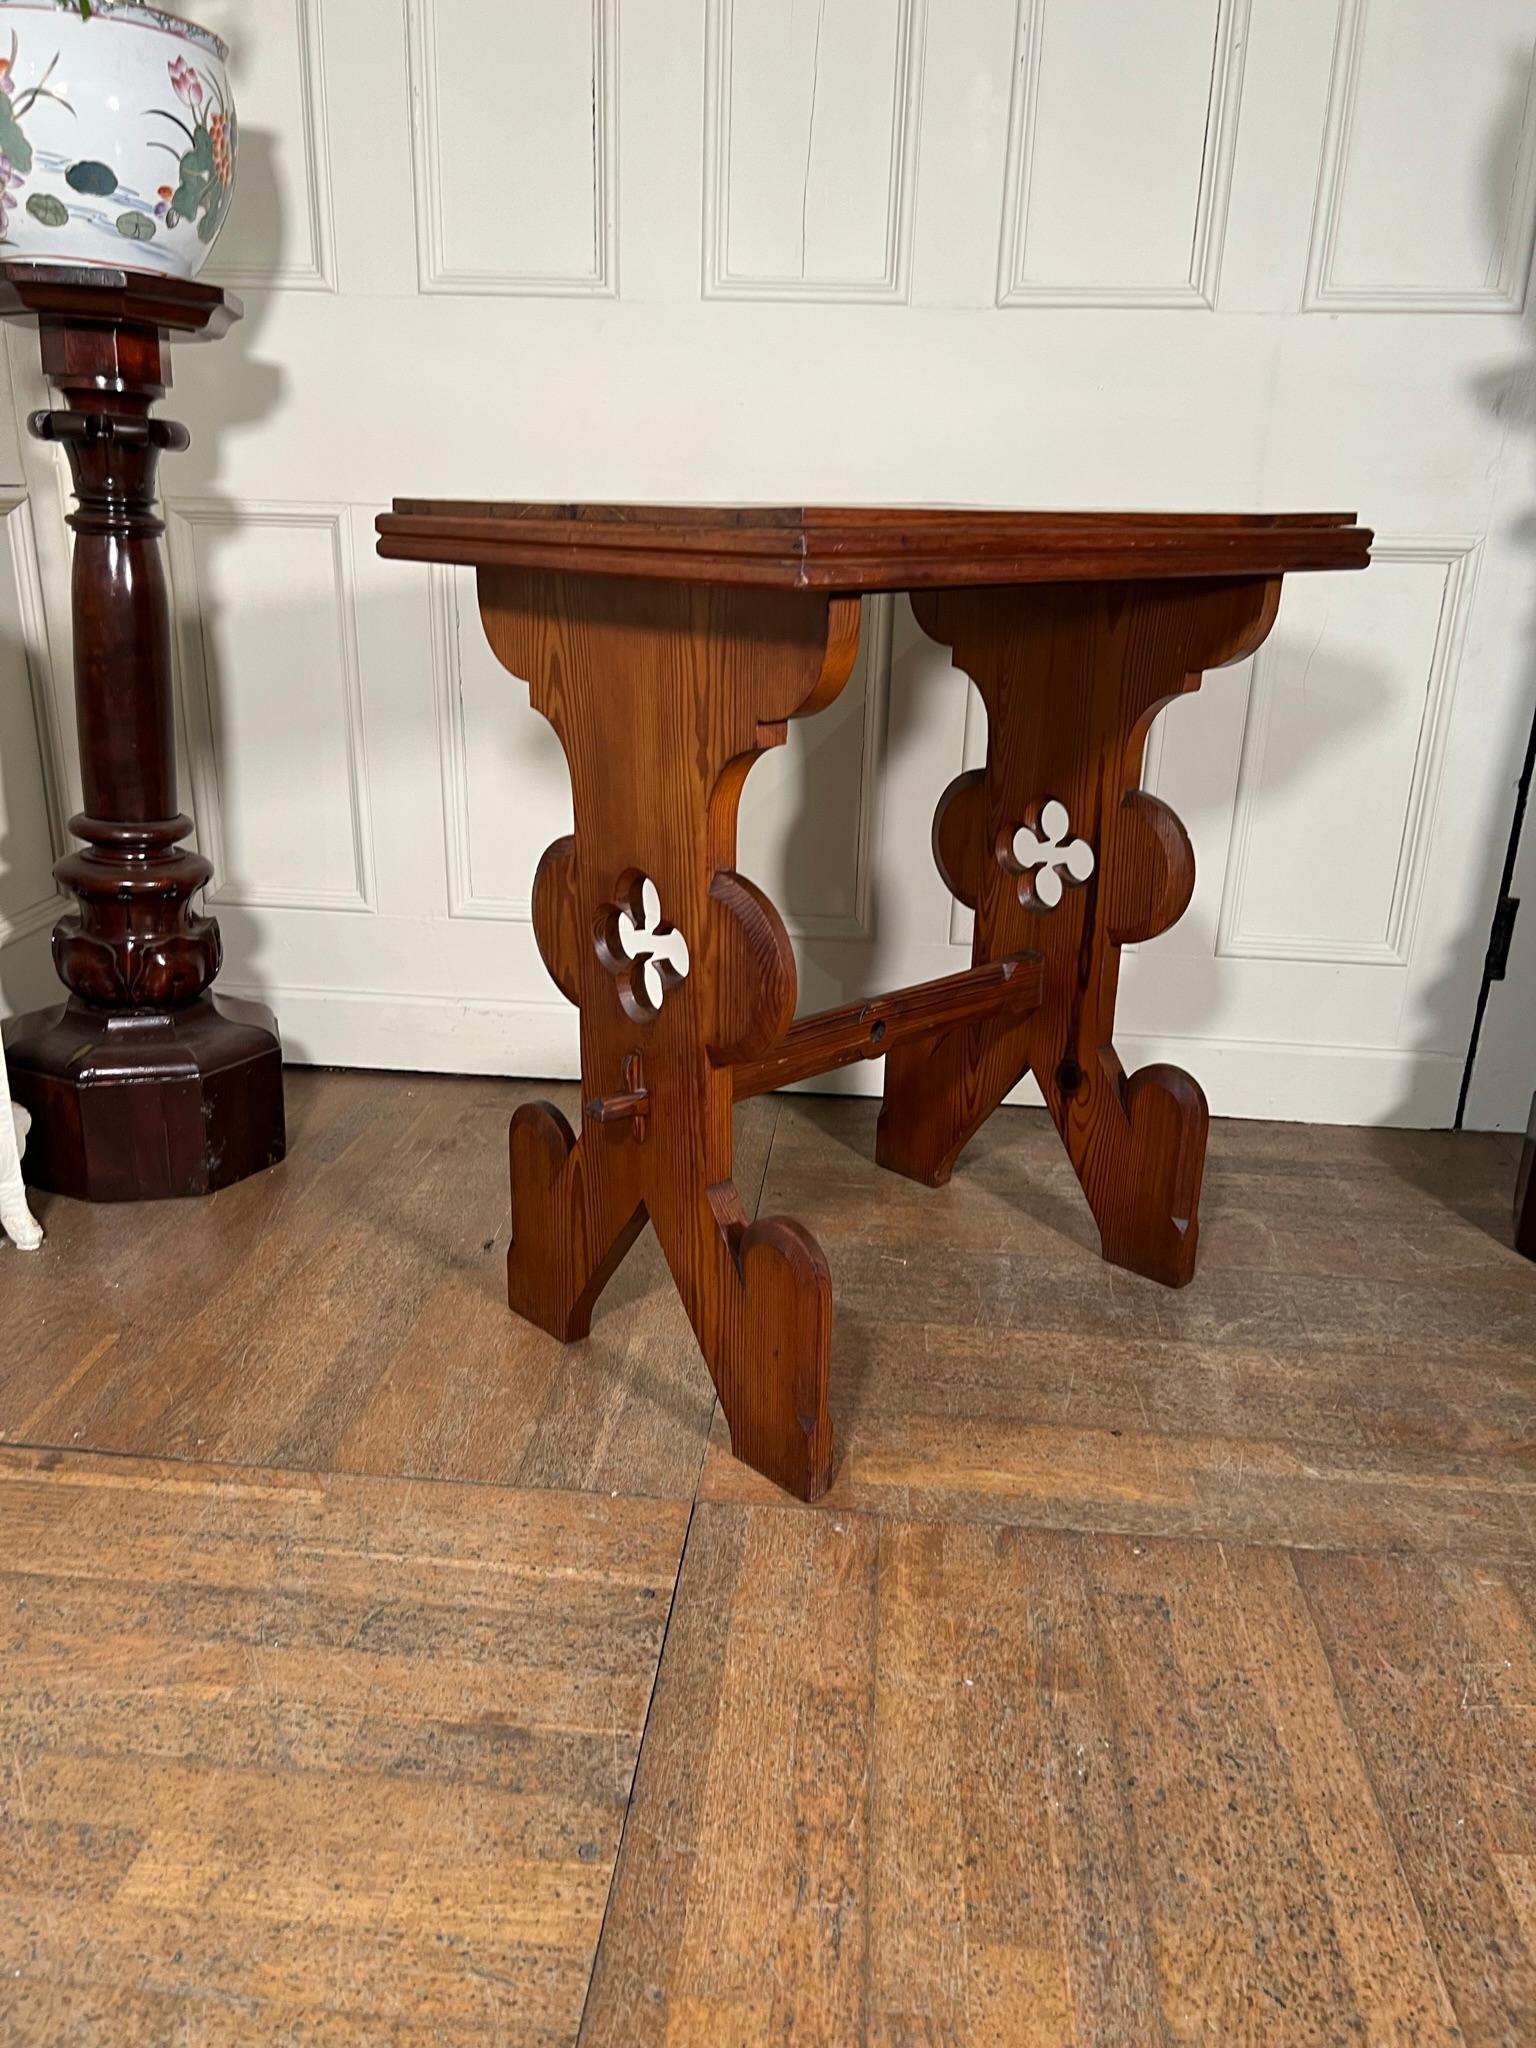 19th Century Gothic Pine Table In Good Condition For Sale In Warrington, GB